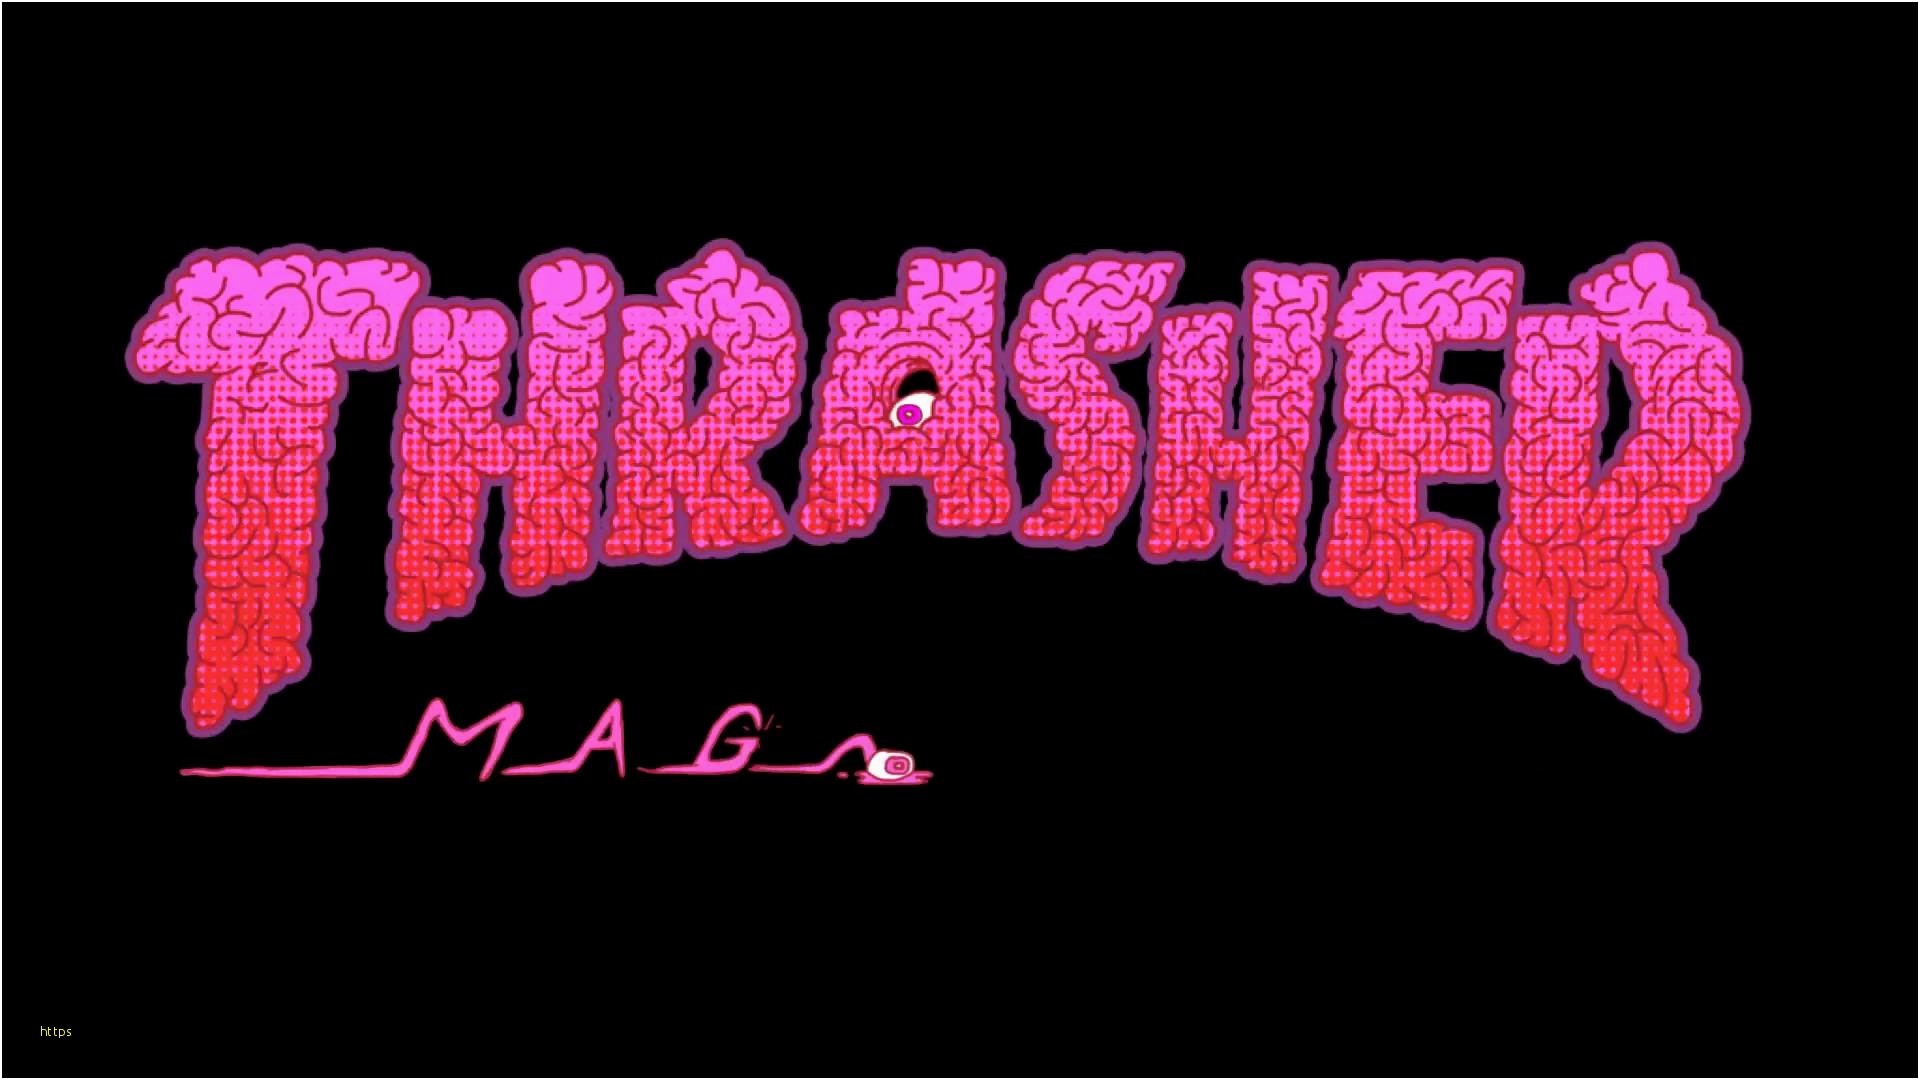 1920x1080 Awesome Thrasher Wallpaper Gallery